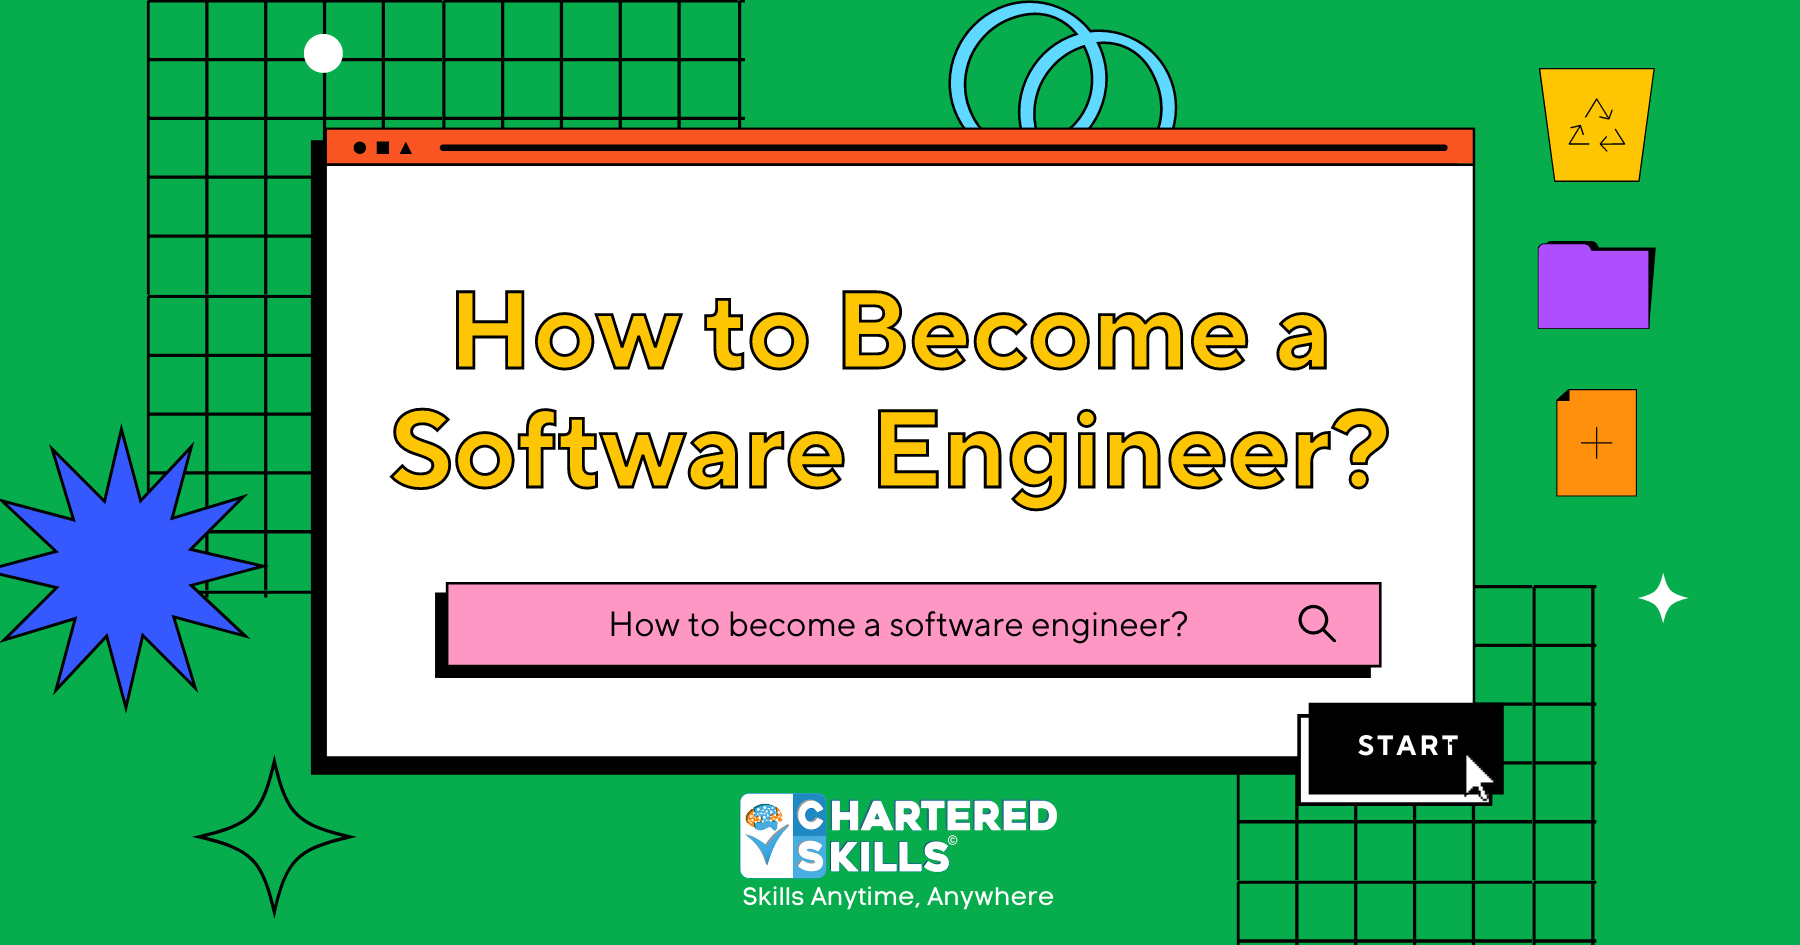 How to become a software engineer?